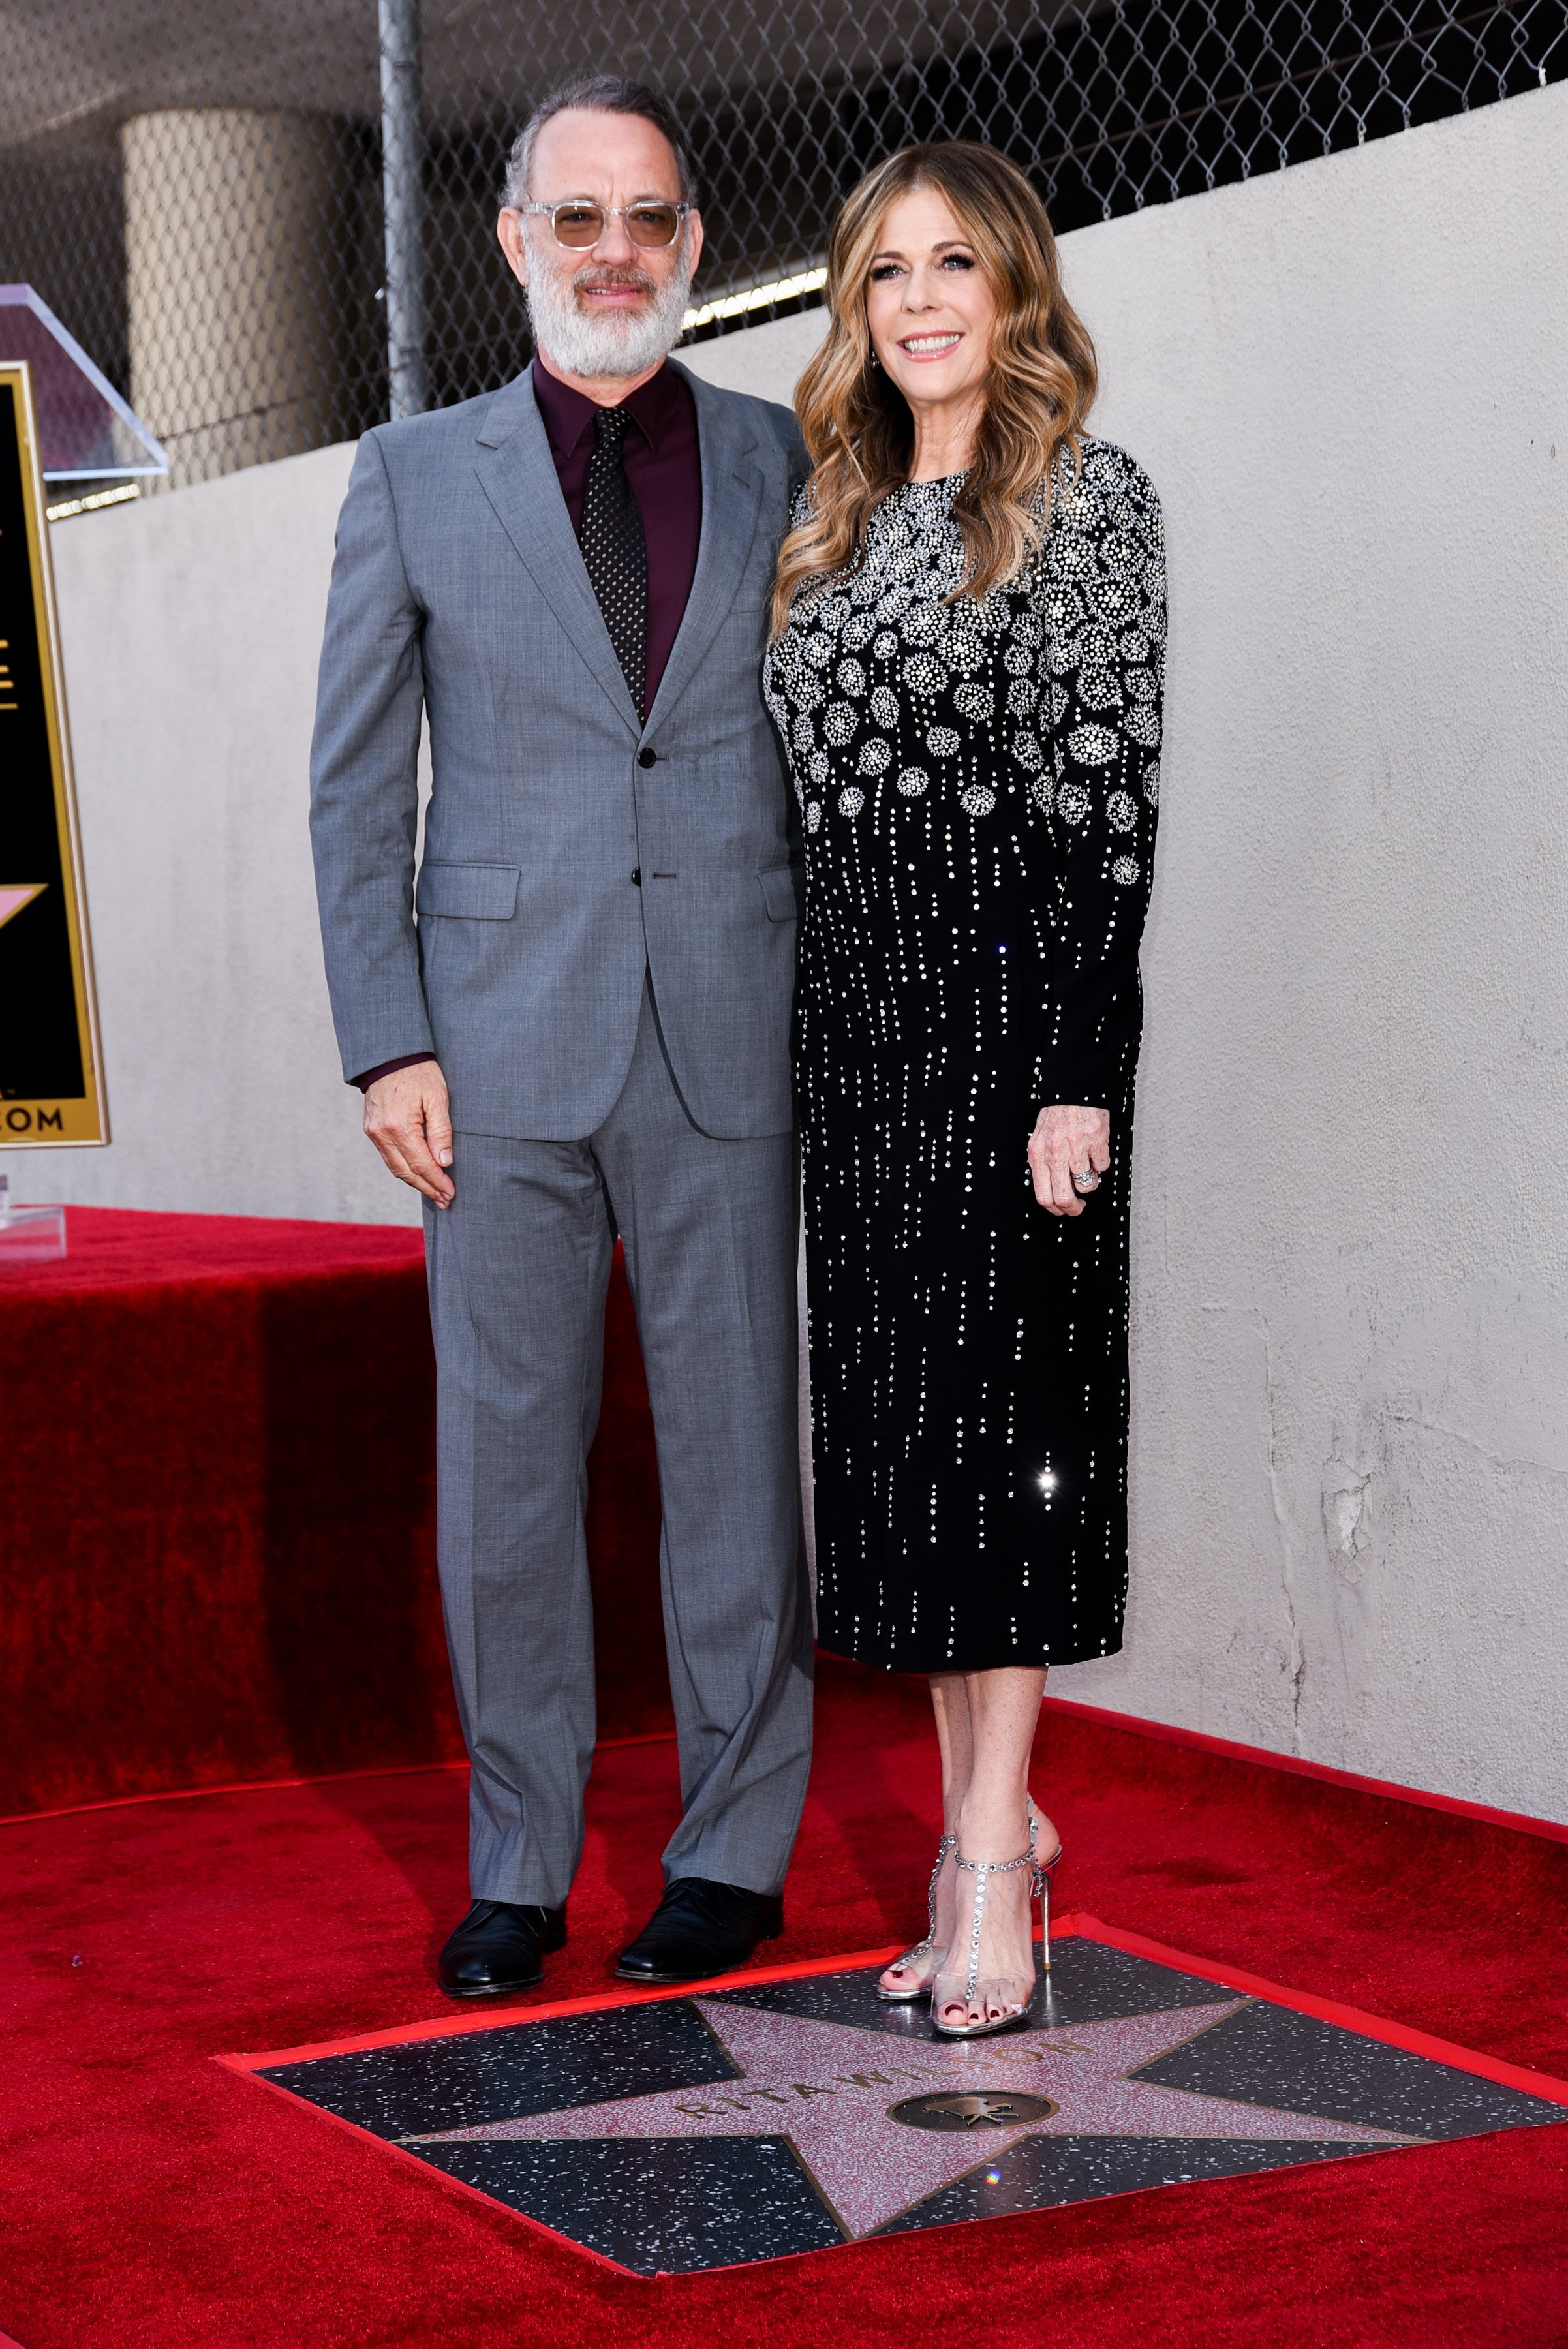 Tom Hanks and Rita Wilson at Rita Wilson's Star Ceremony on the Hollywood Walk of Fame on March 29, 2019. |  Source: Getty Images